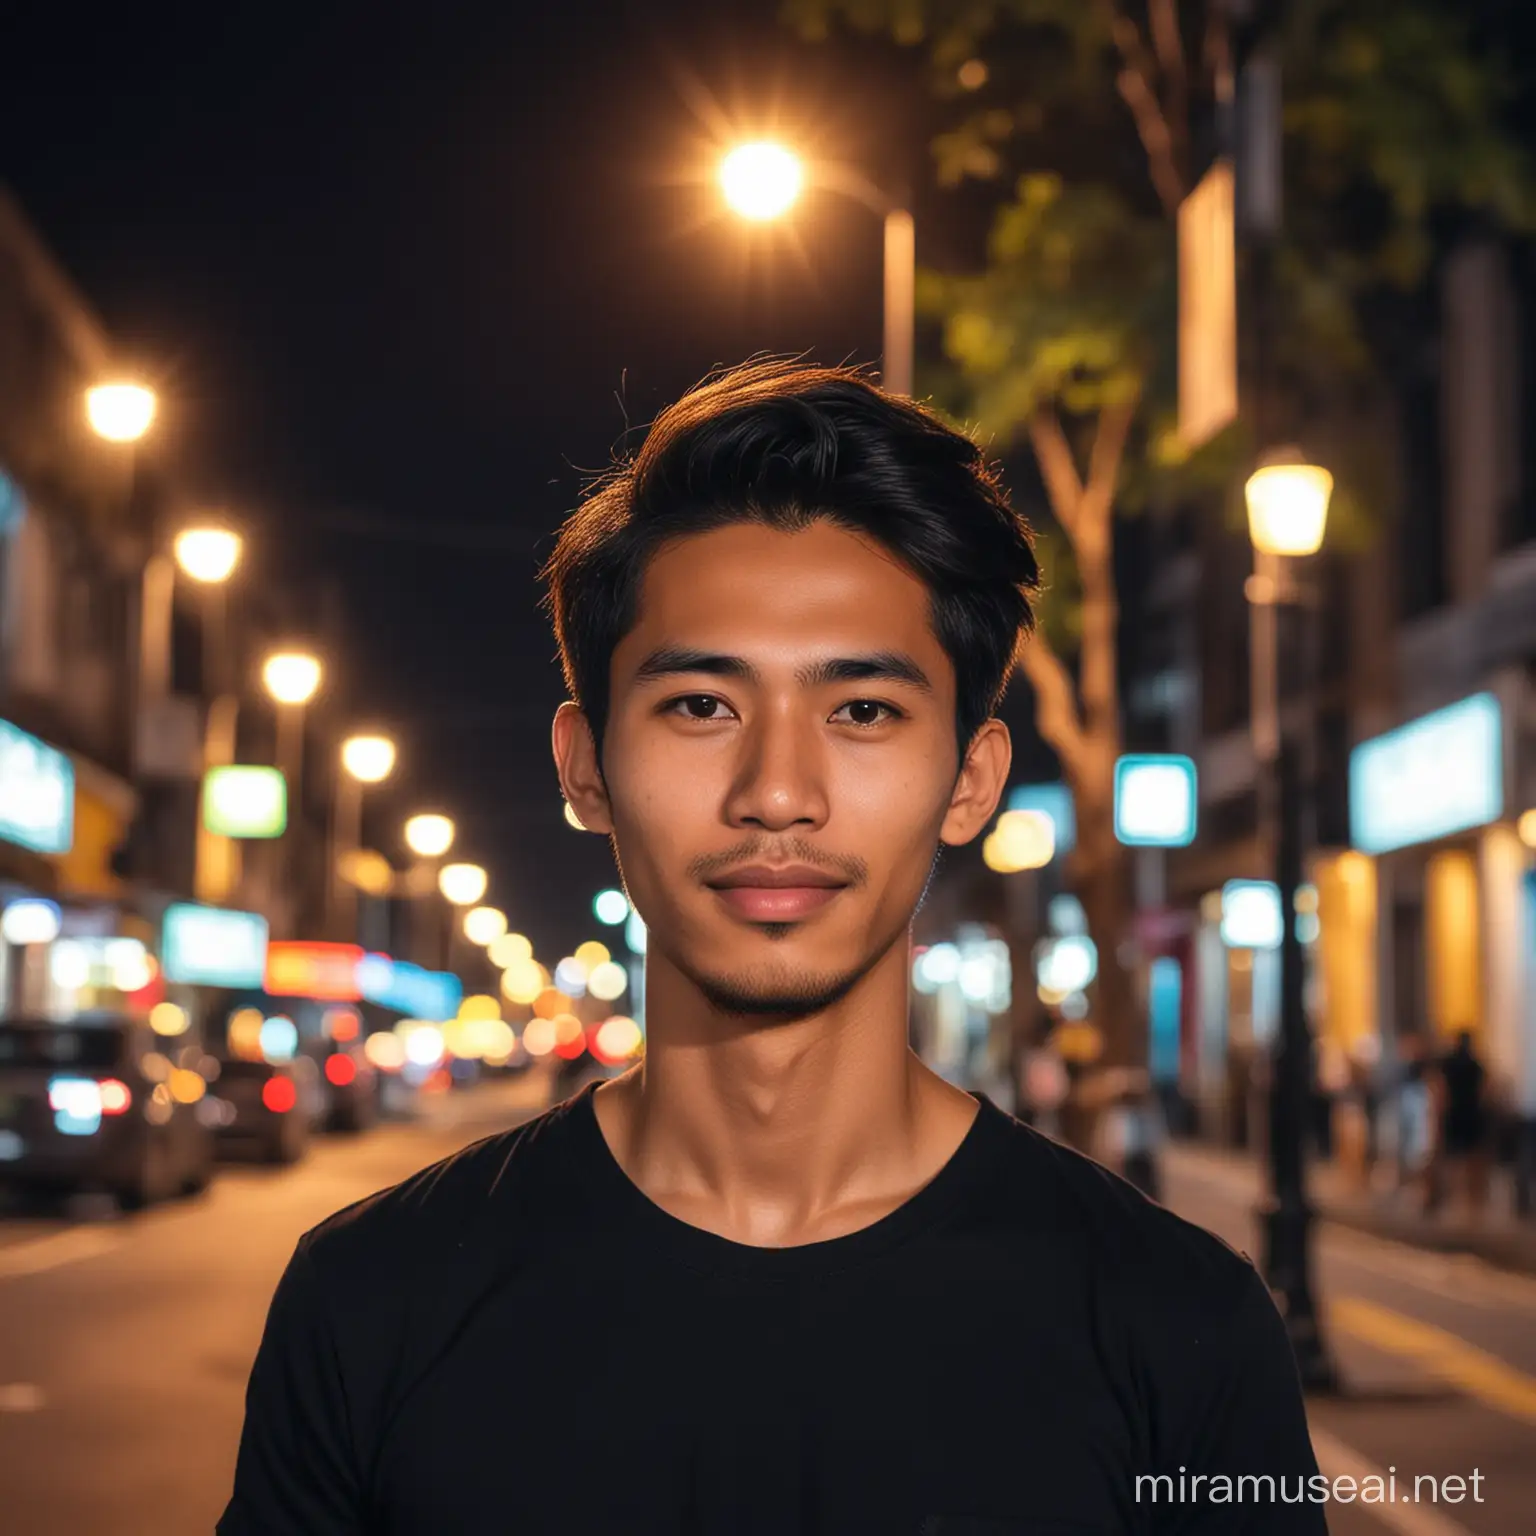 Young Indonesian Man in Urban Night Setting with Colorful Street Lights